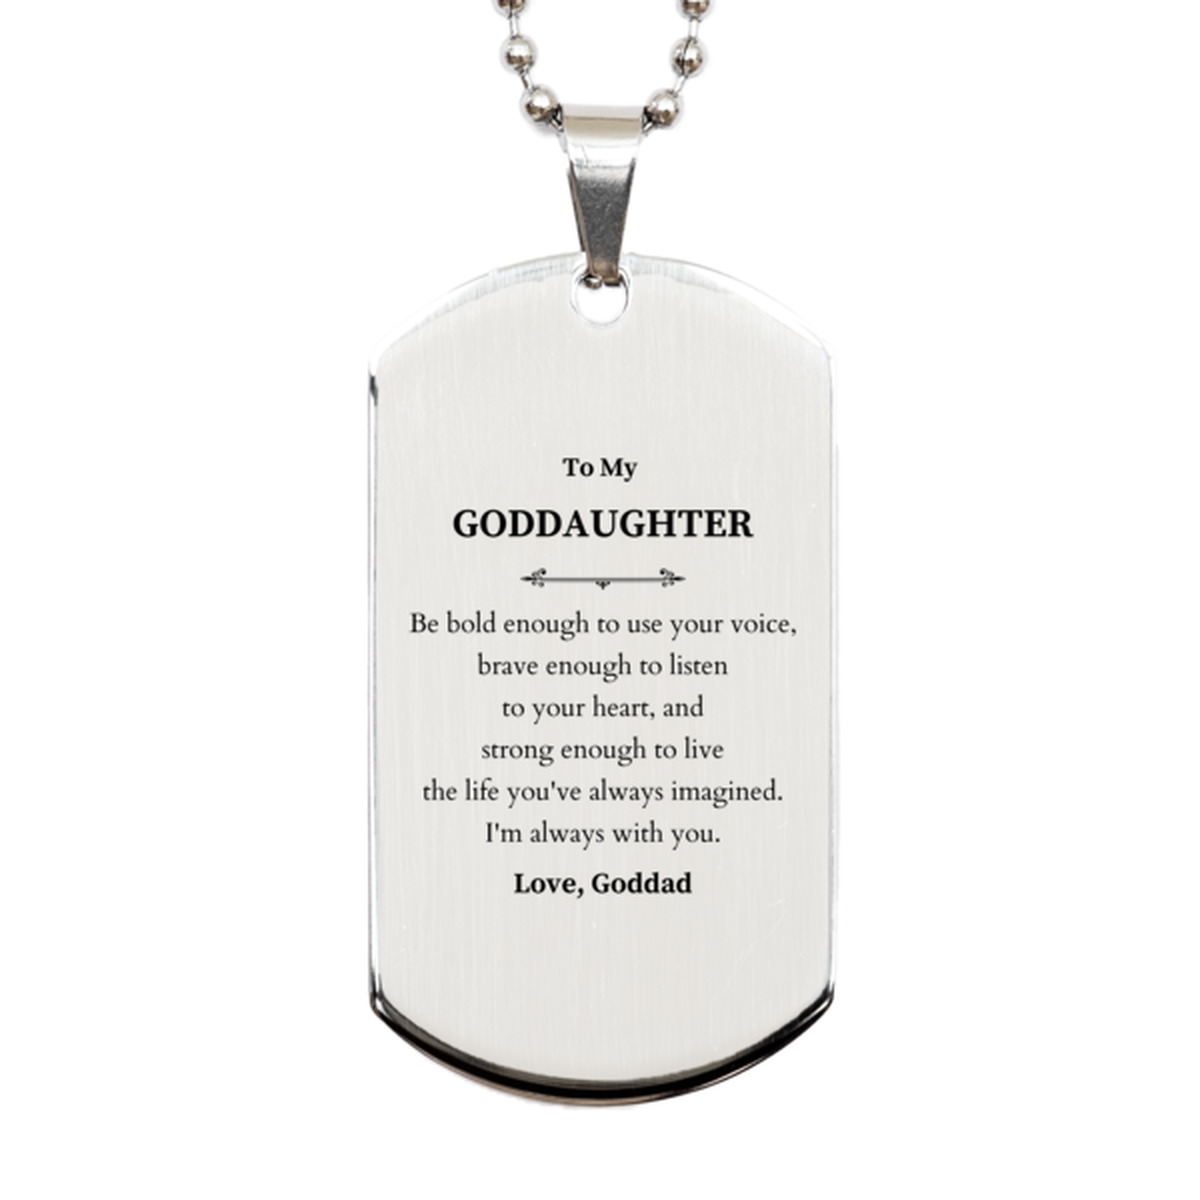 Keepsake Goddaughter Silver Dog Tag Gift Idea Graduation Christmas Birthday Goddaughter from Goddad, Goddaughter Be bold enough to use your voice, brave enough to listen to your heart. Love, Goddad